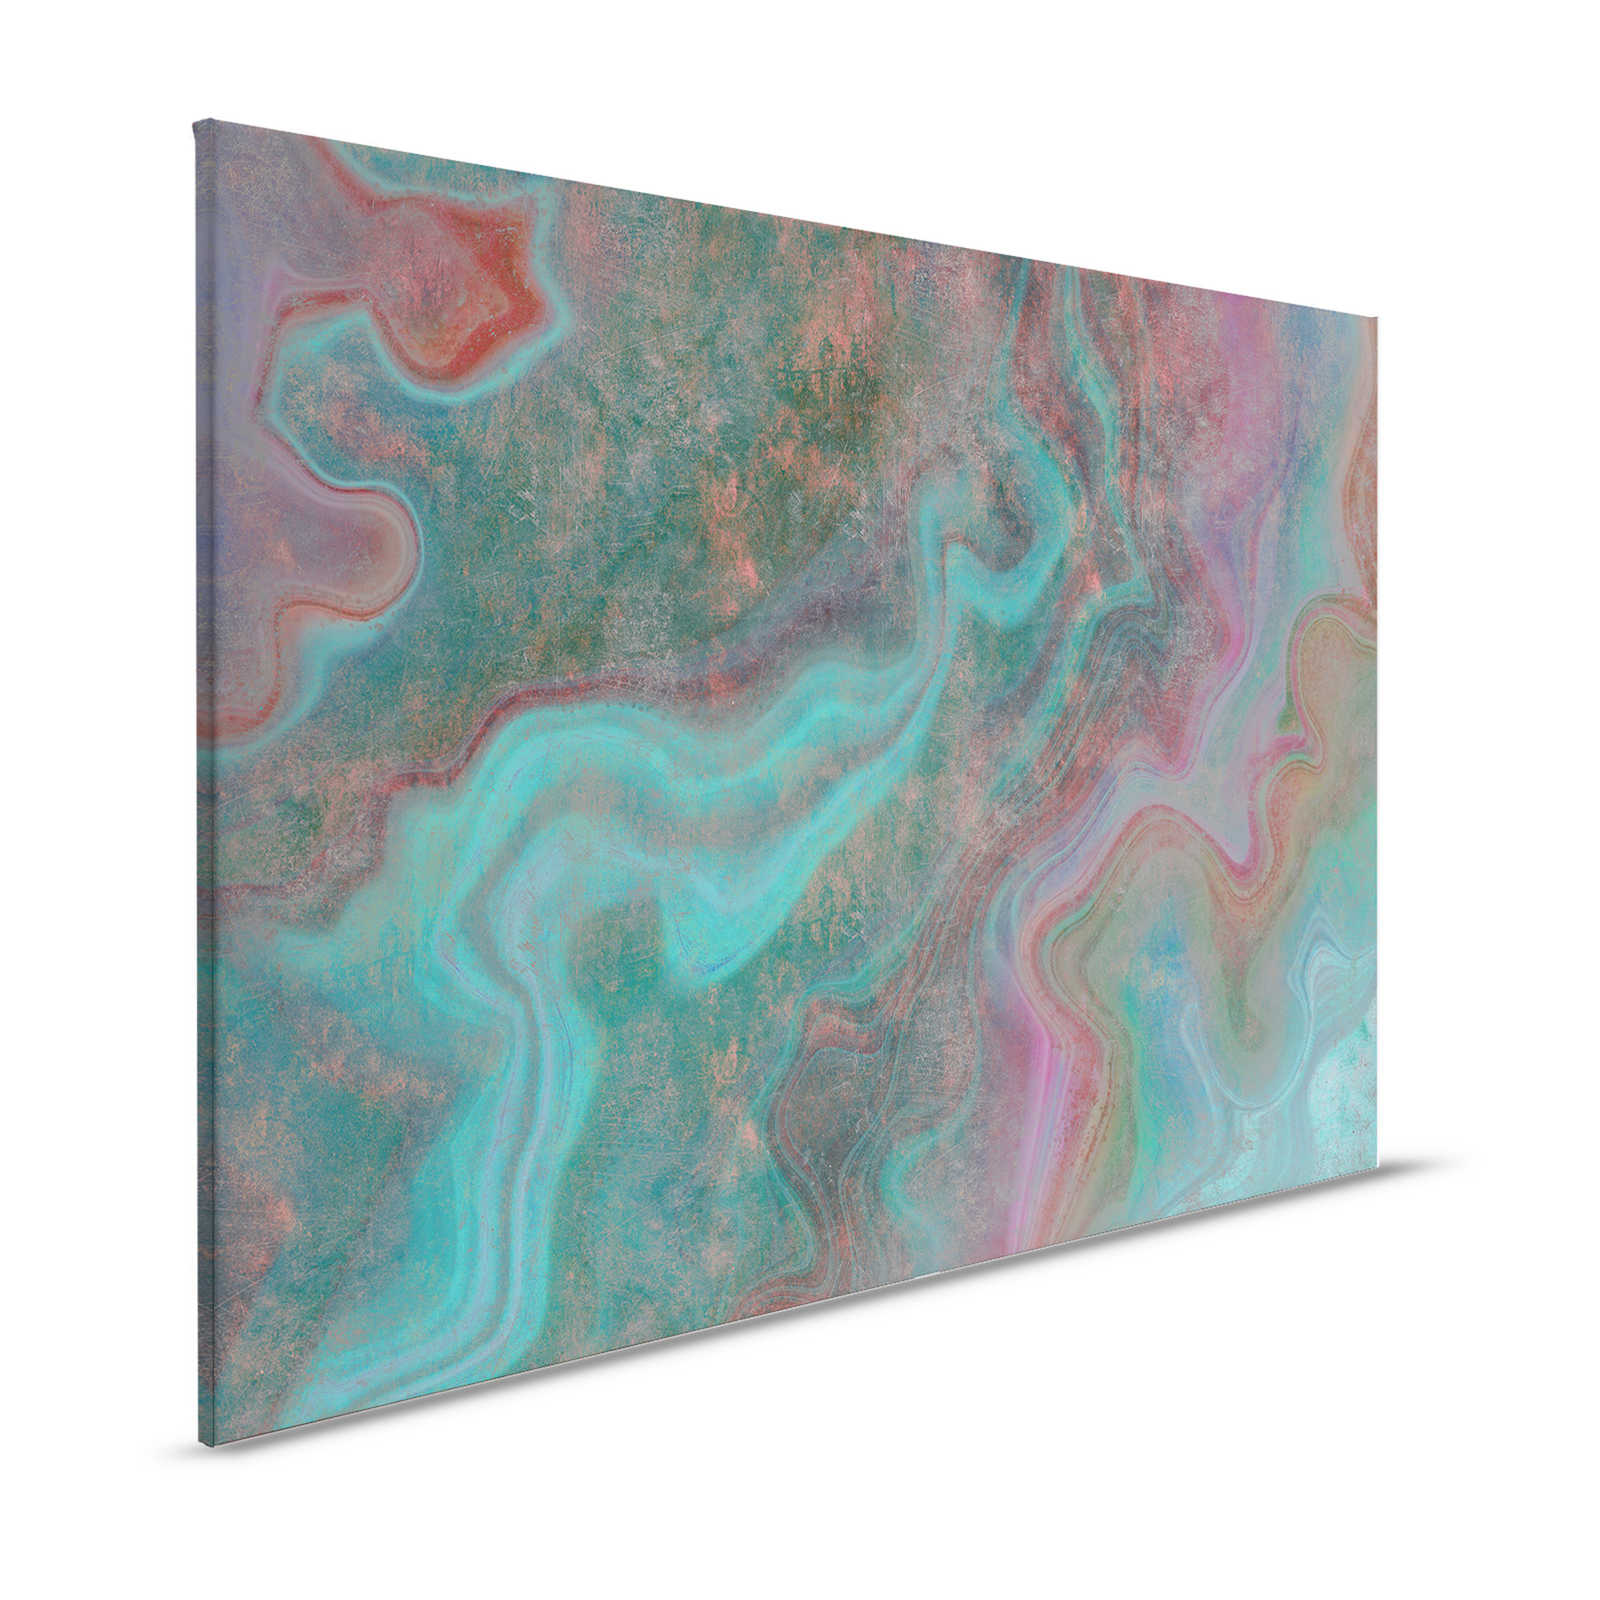 Marble 3 - Canvas painting with scratch structure in colourful marble look as a highlight - 1.20 m x 0.80 m
